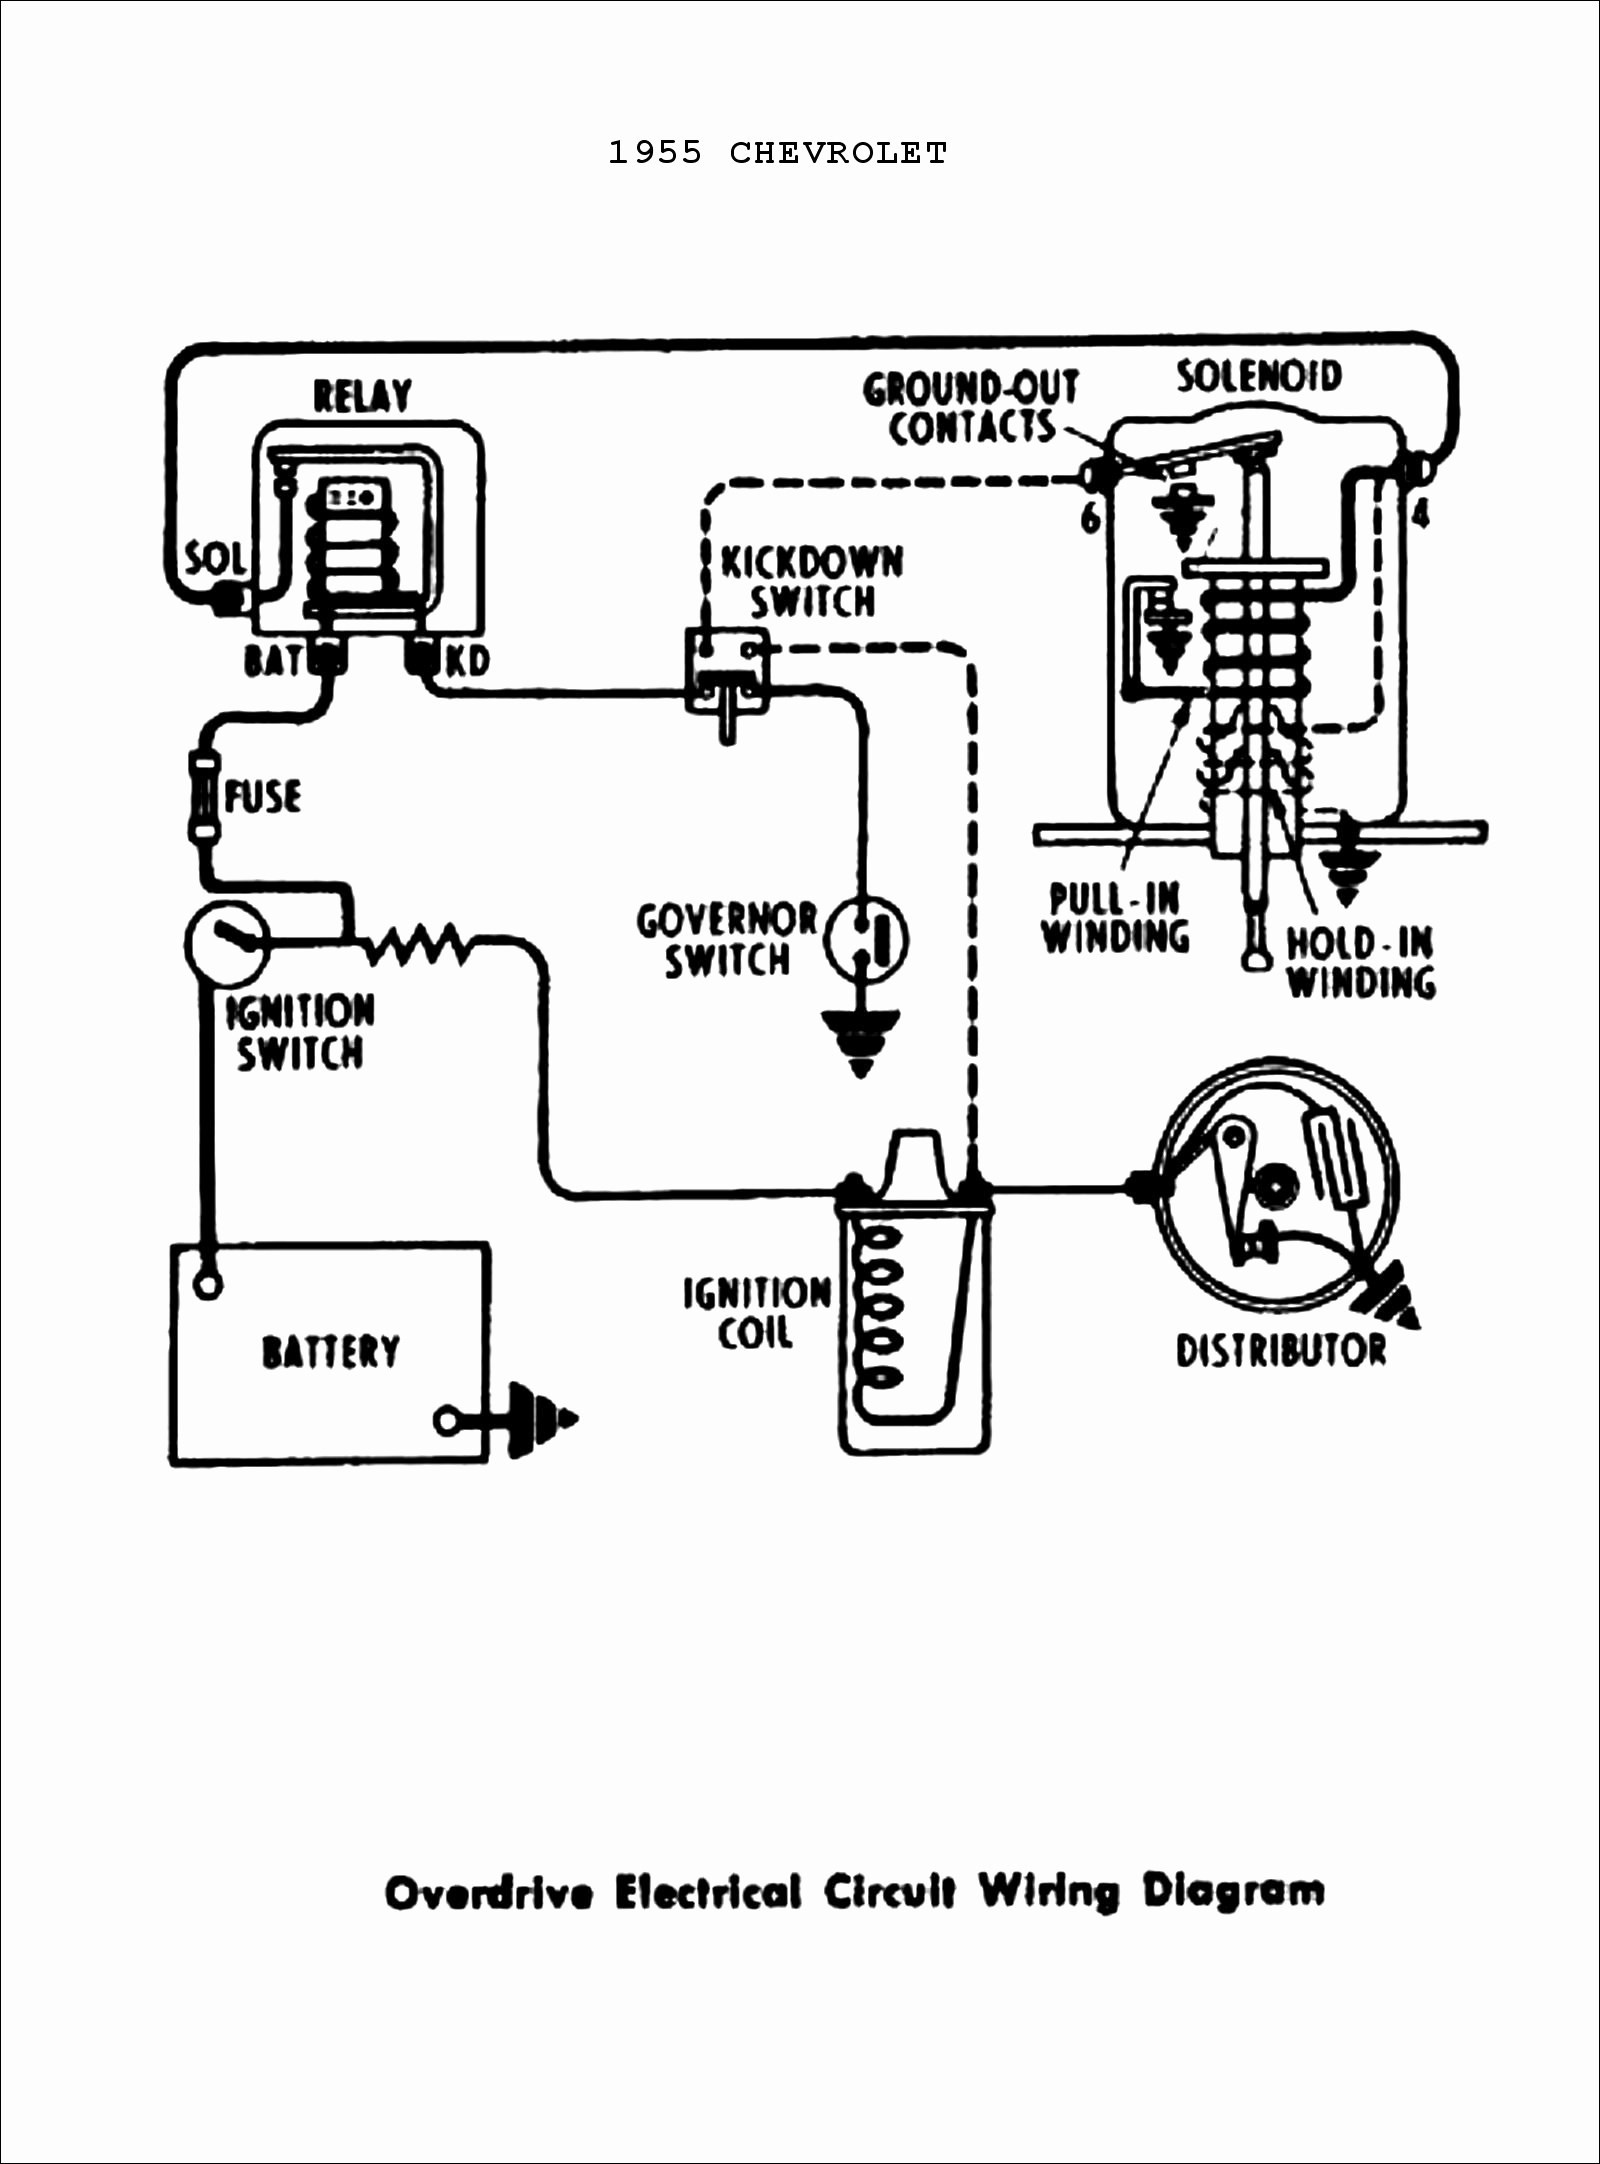 Remote Start Wiring Diagrams 1955 Chevy Coil Wiring Simple Guide About Wiring Diagram Of Remote Start Wiring Diagrams